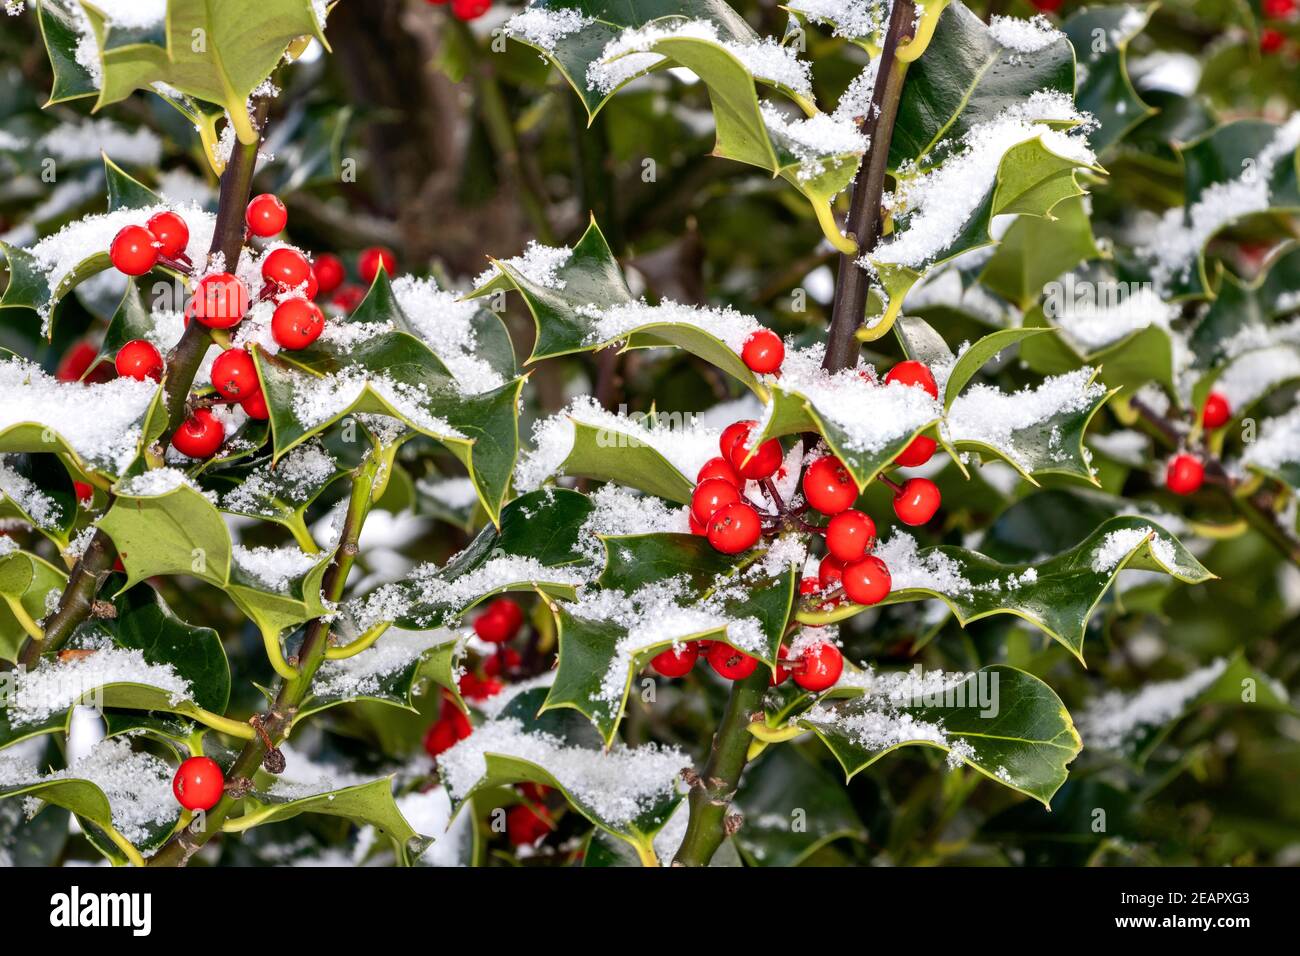 HOLLY WITH RED BERRIES  Ilex aquifolium WITH EVERGREEN LEAVES IN WINTER WITH SNOW Stock Photo